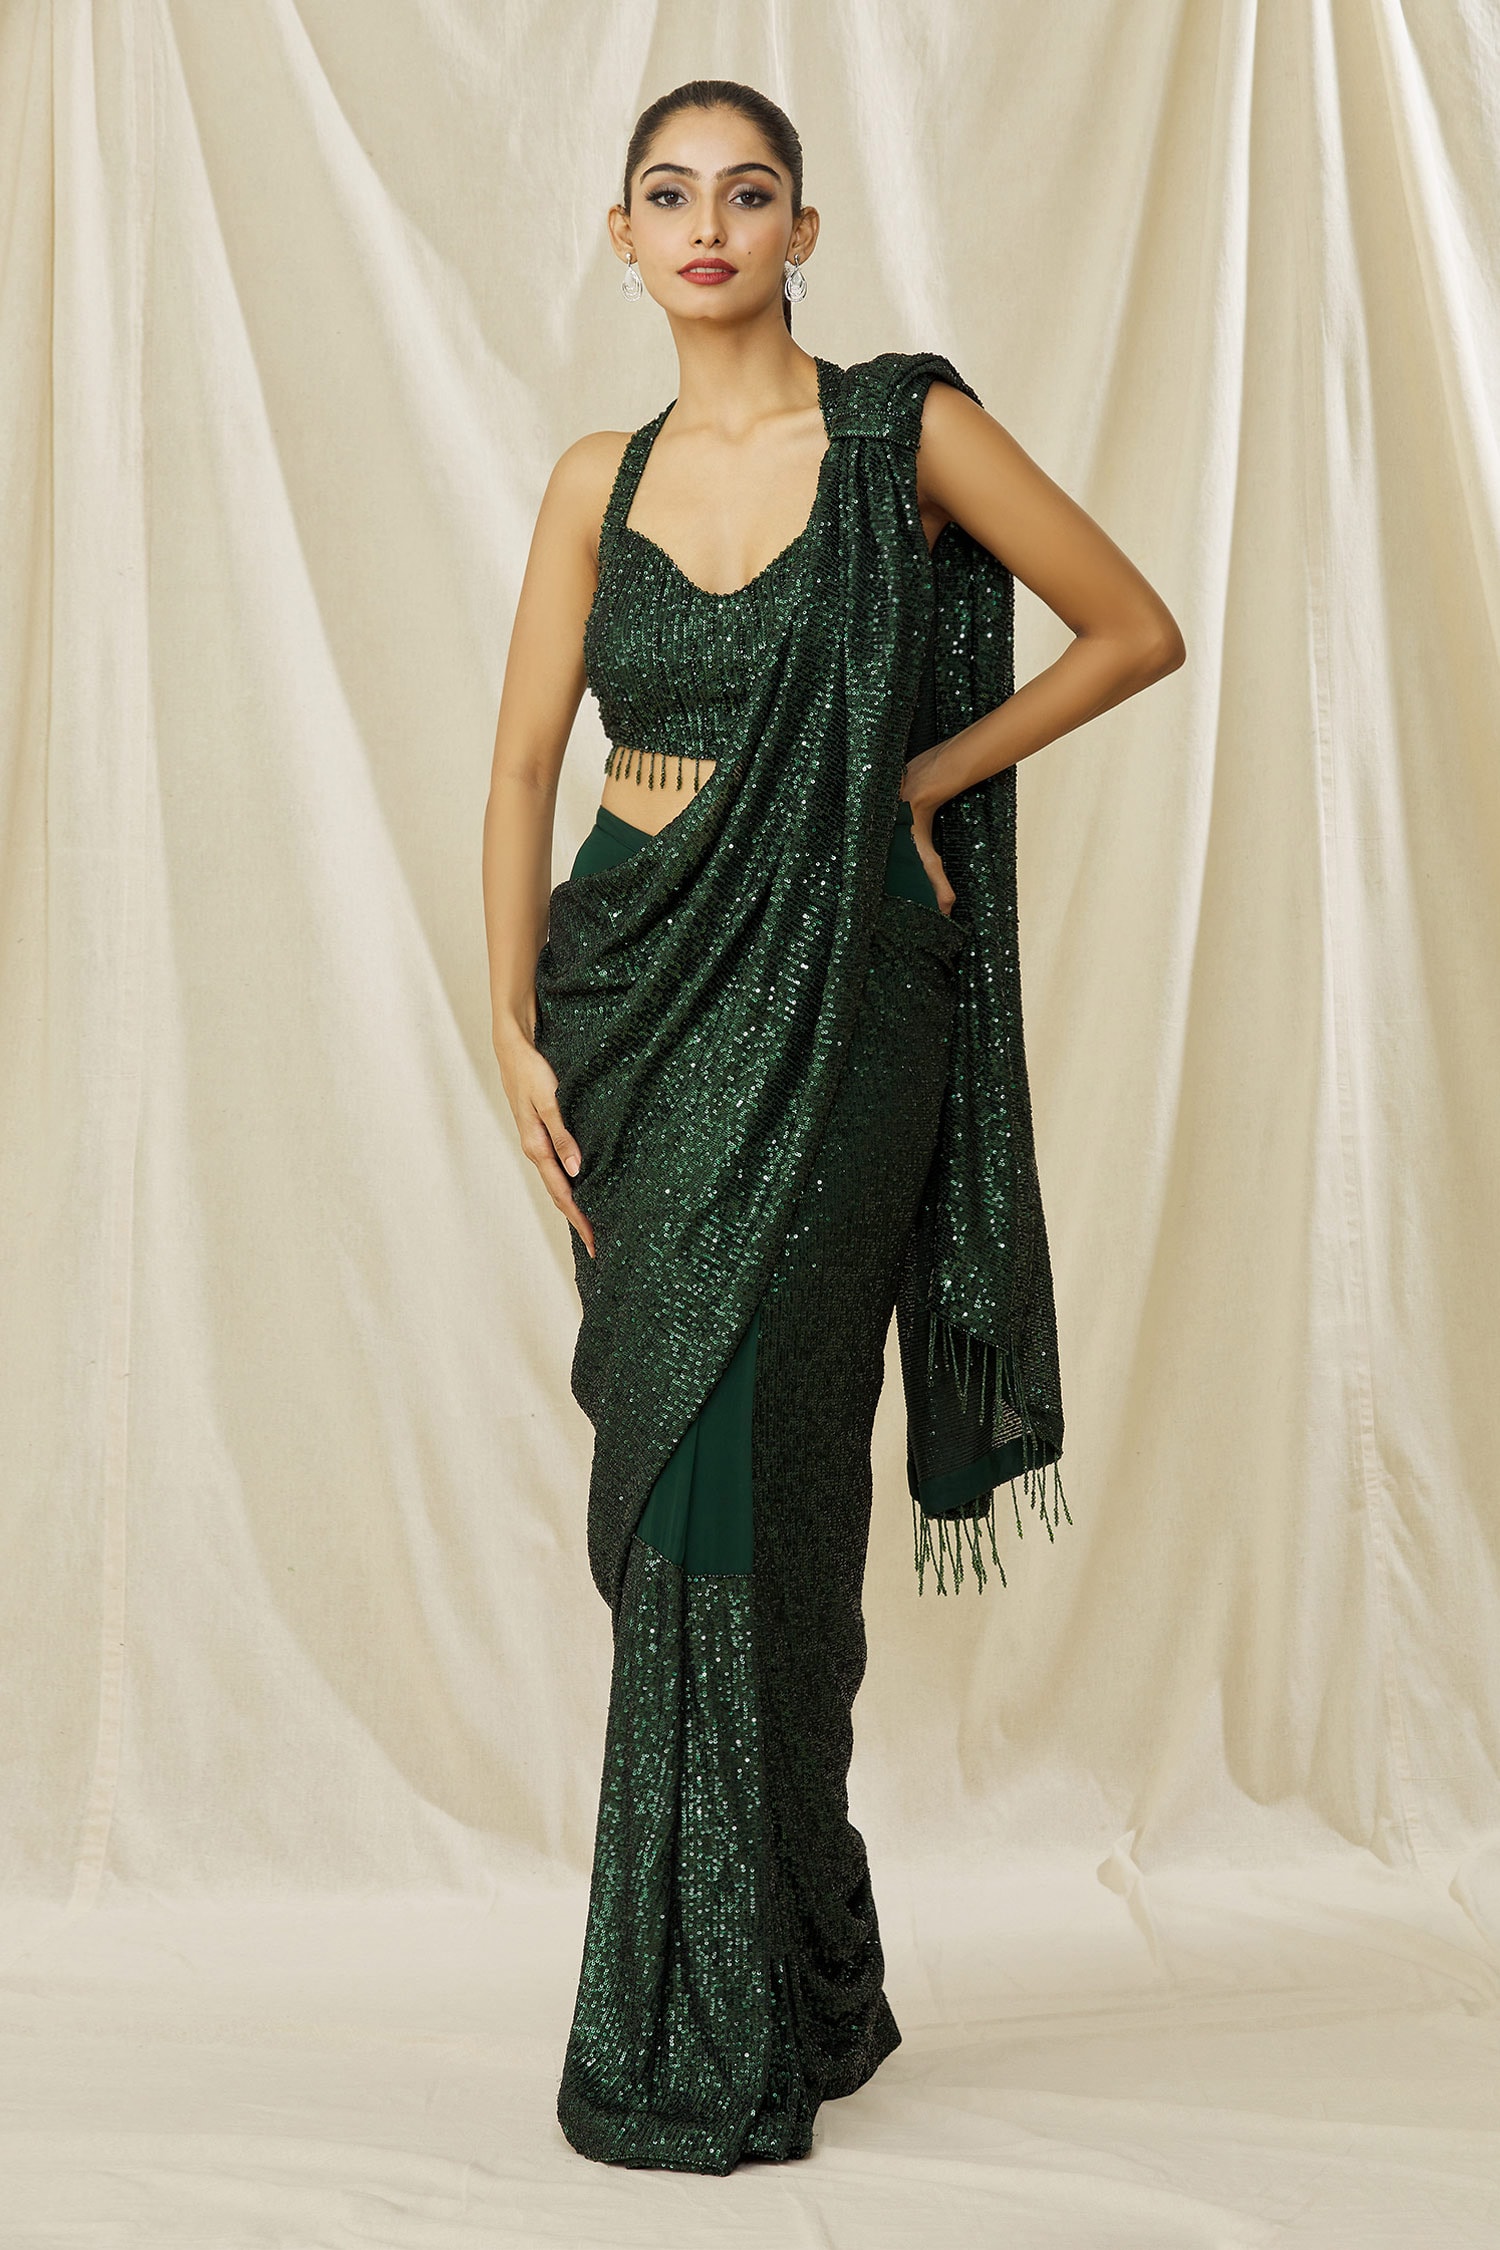 ARPAN VOHRA Emerald Green Georgette Embellished Pre Draped Saree With Blouse For Women